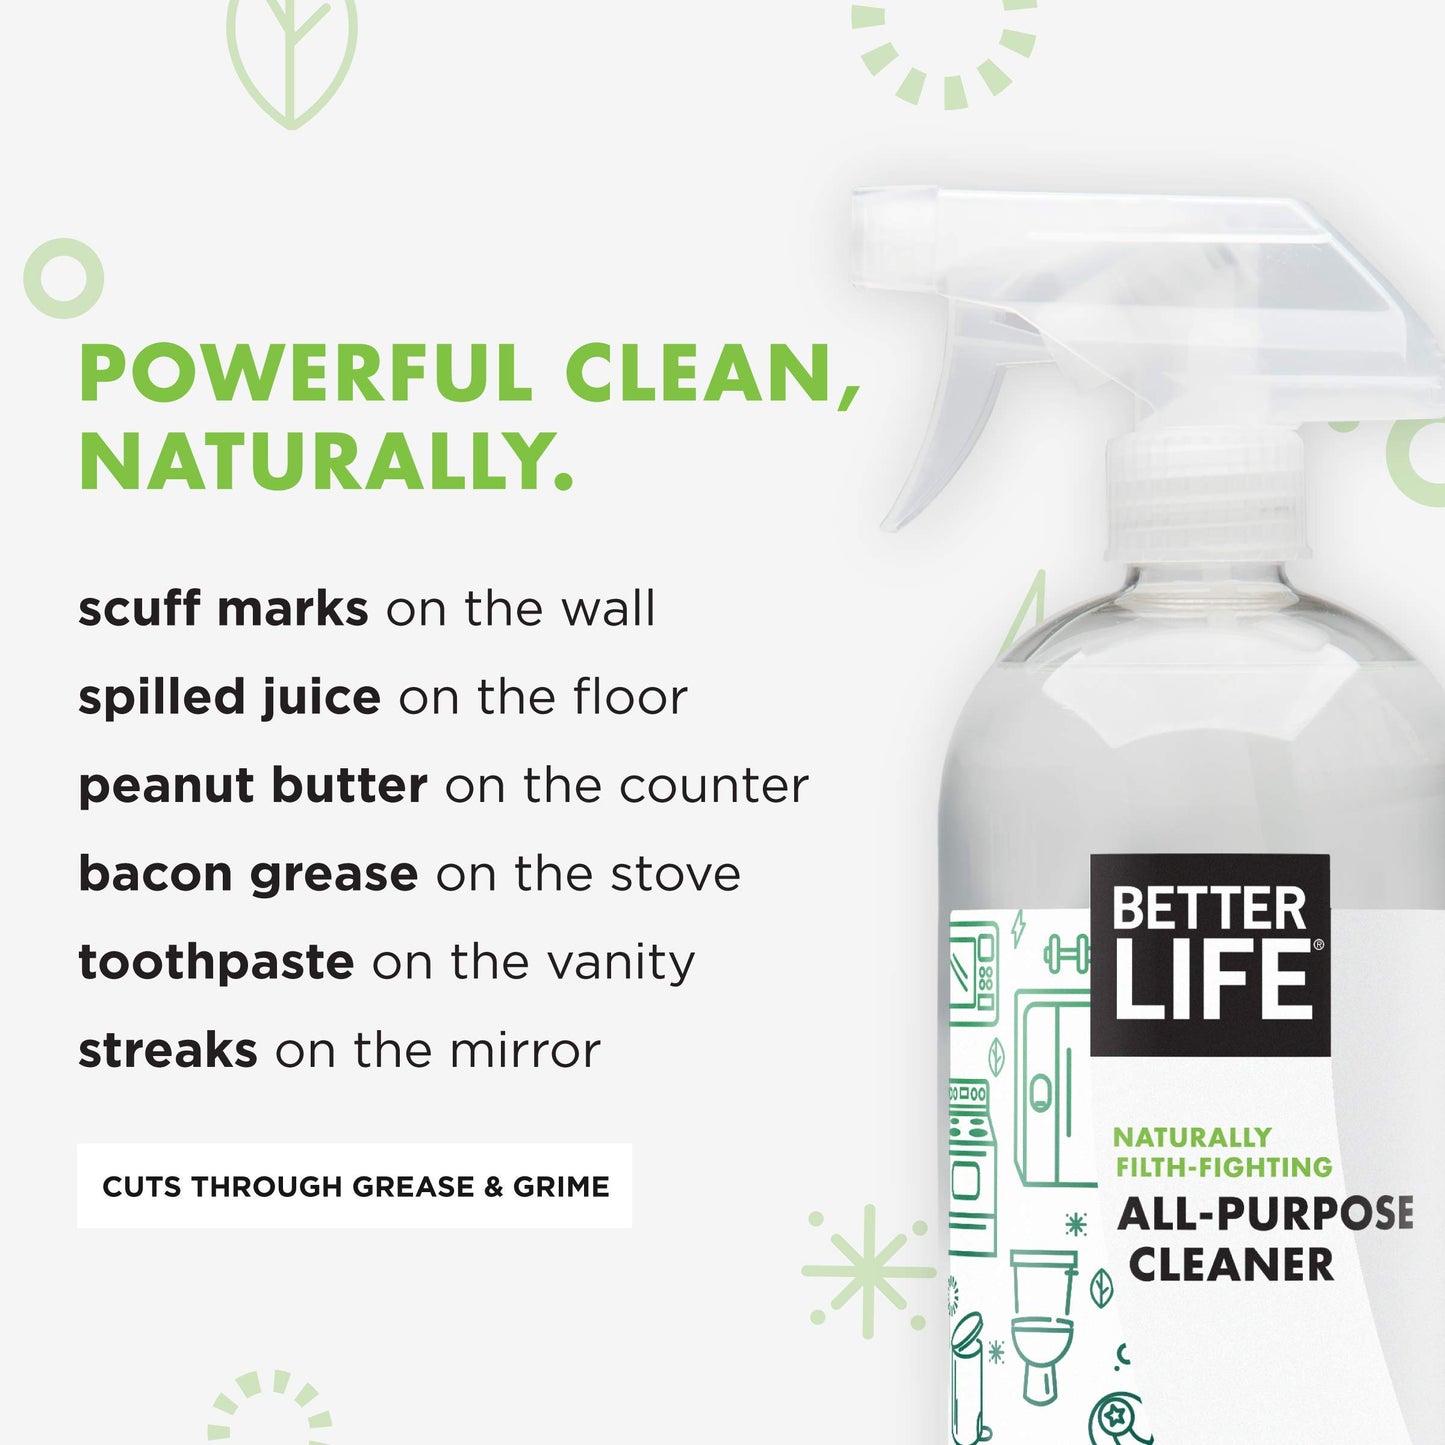 Better Life All Purpose Cleaner - Multipurpose Home and Kitchen Cleaning Spray for Glass, Countertops, Appliances, Upholstery & More - Multi-surface Spray Cleaner - 32oz (Pack of 2) Unscented